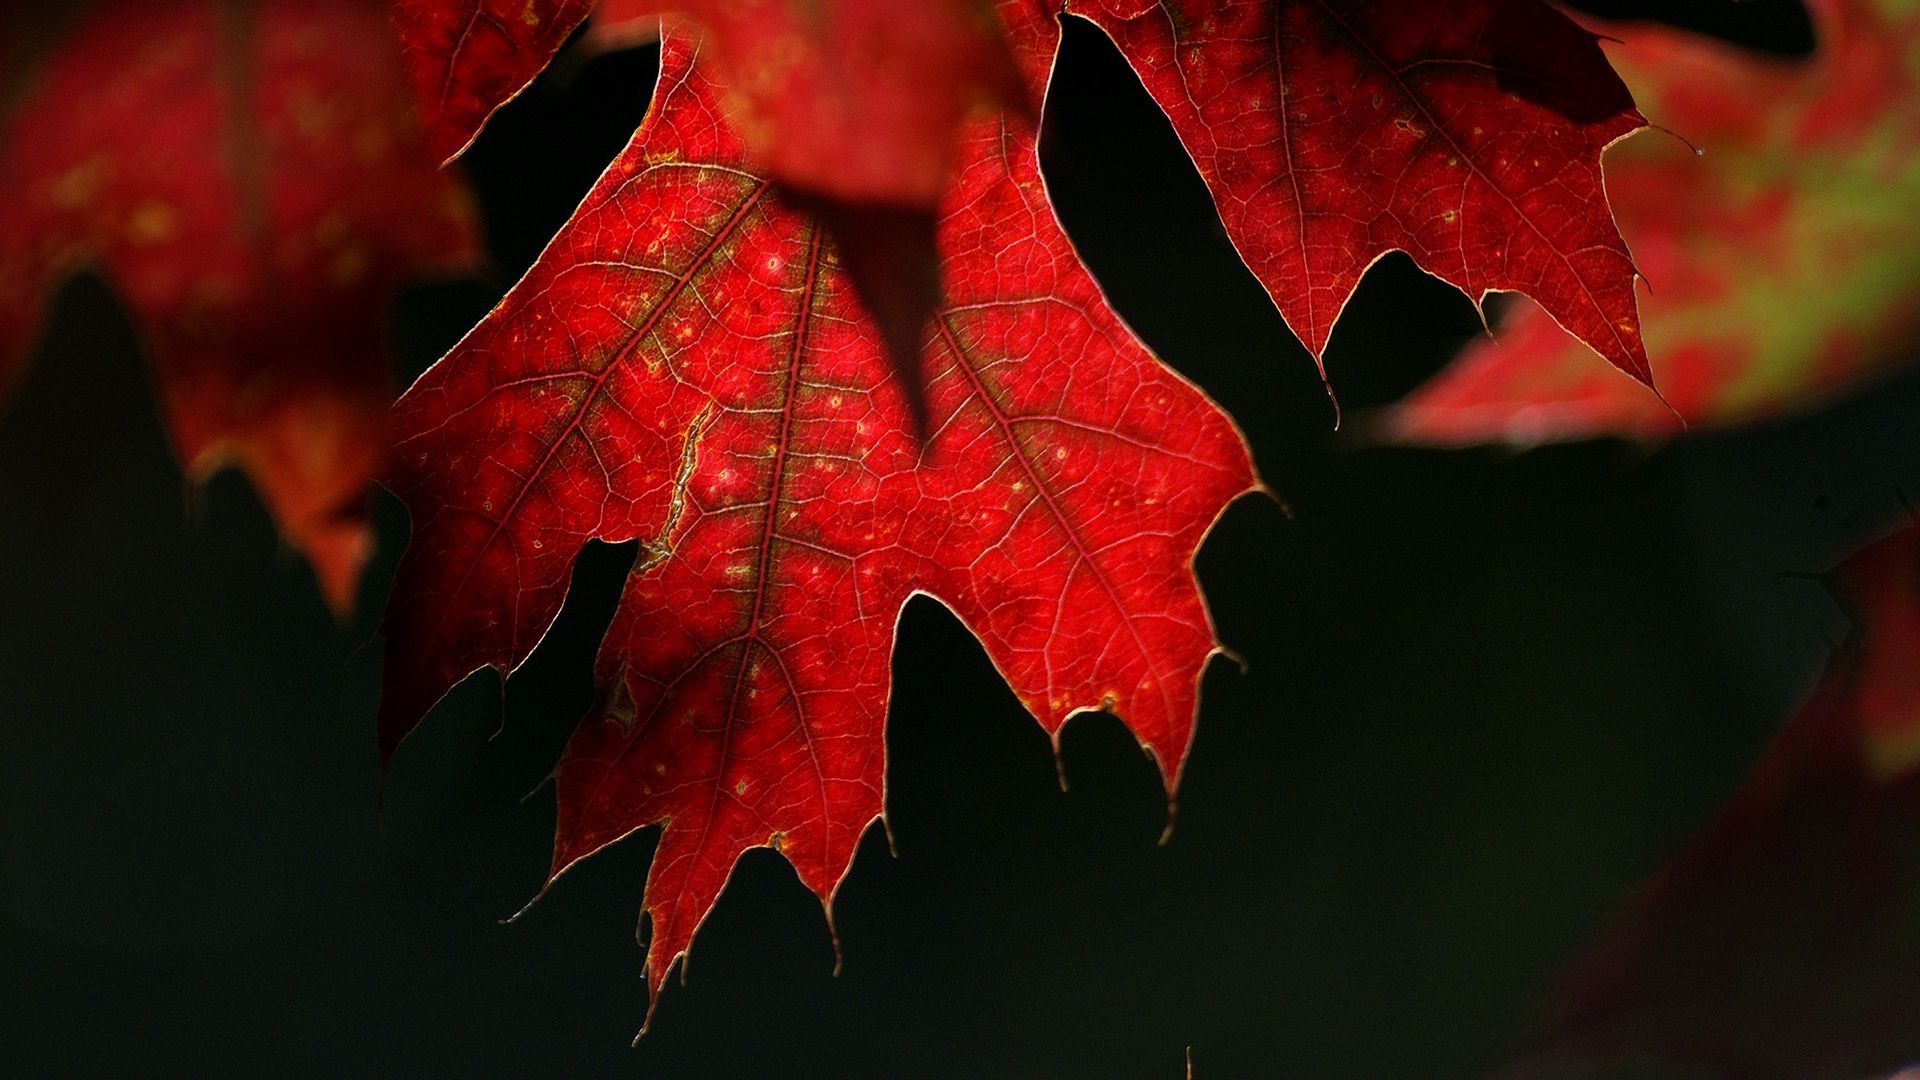 Download wallpaper 1920x1080 maple, leaf, red, macro full hd, hdtv, fhd